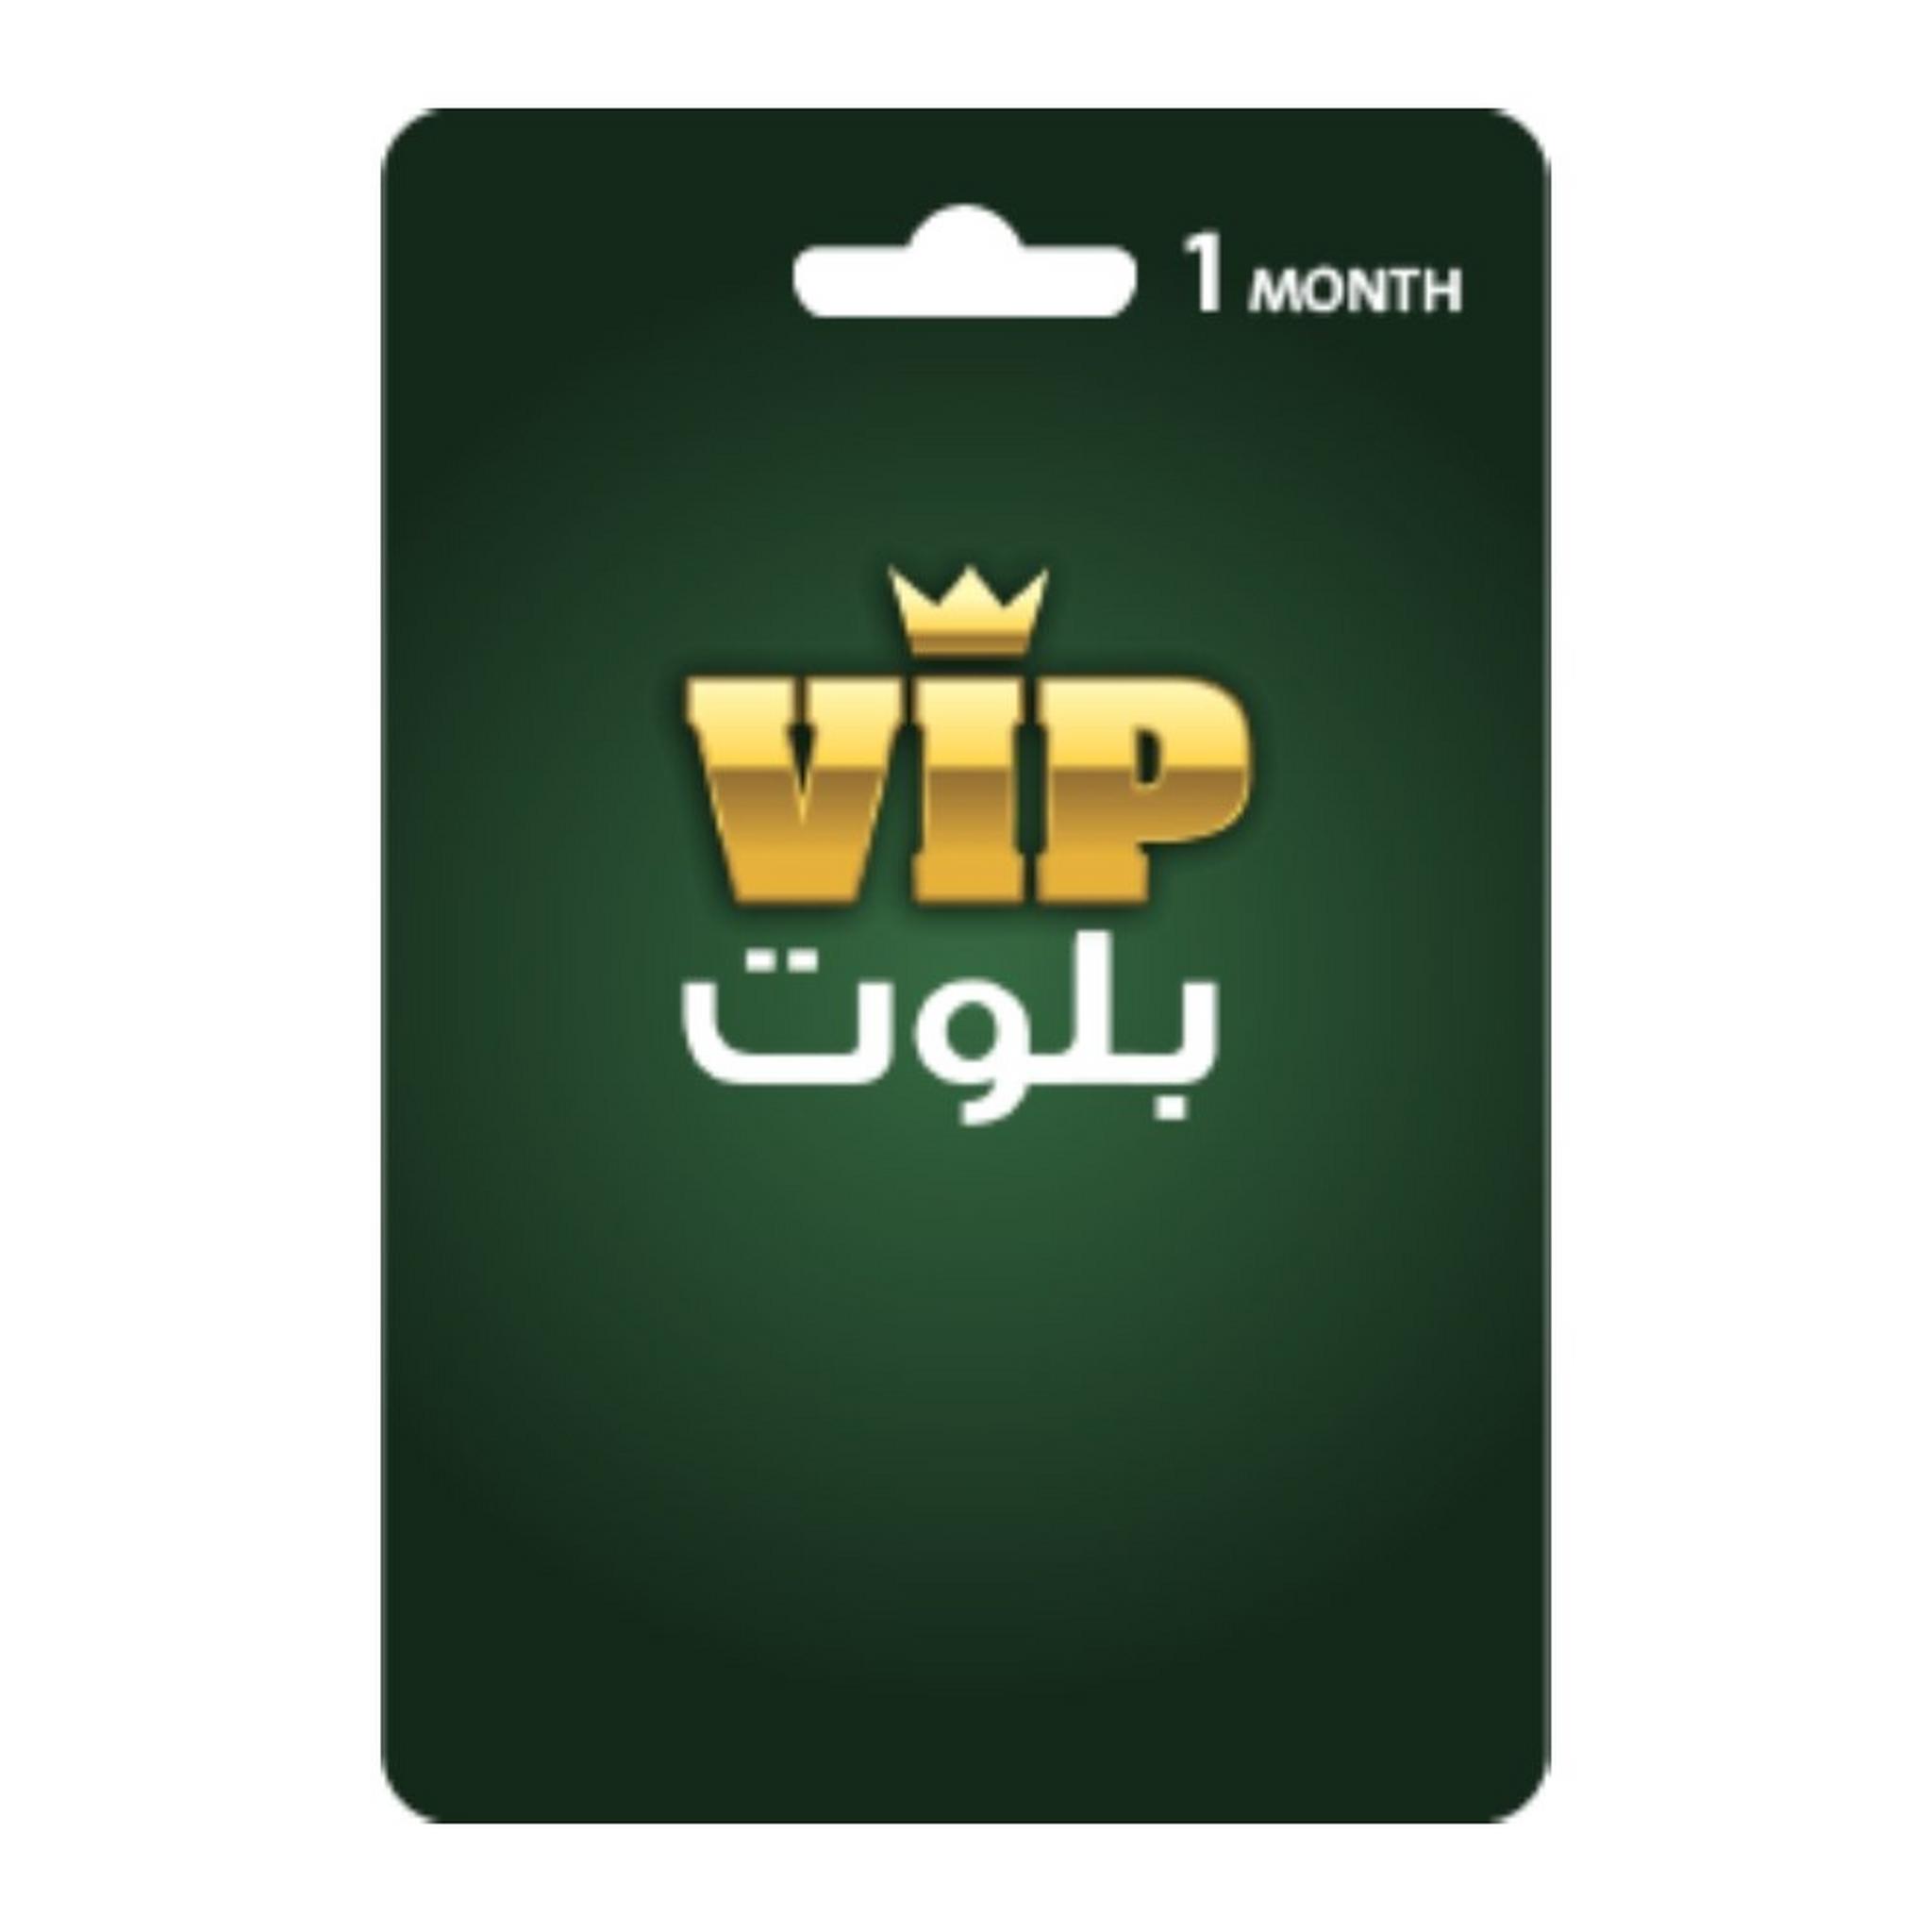 VIP Baloot Card For 1 Month